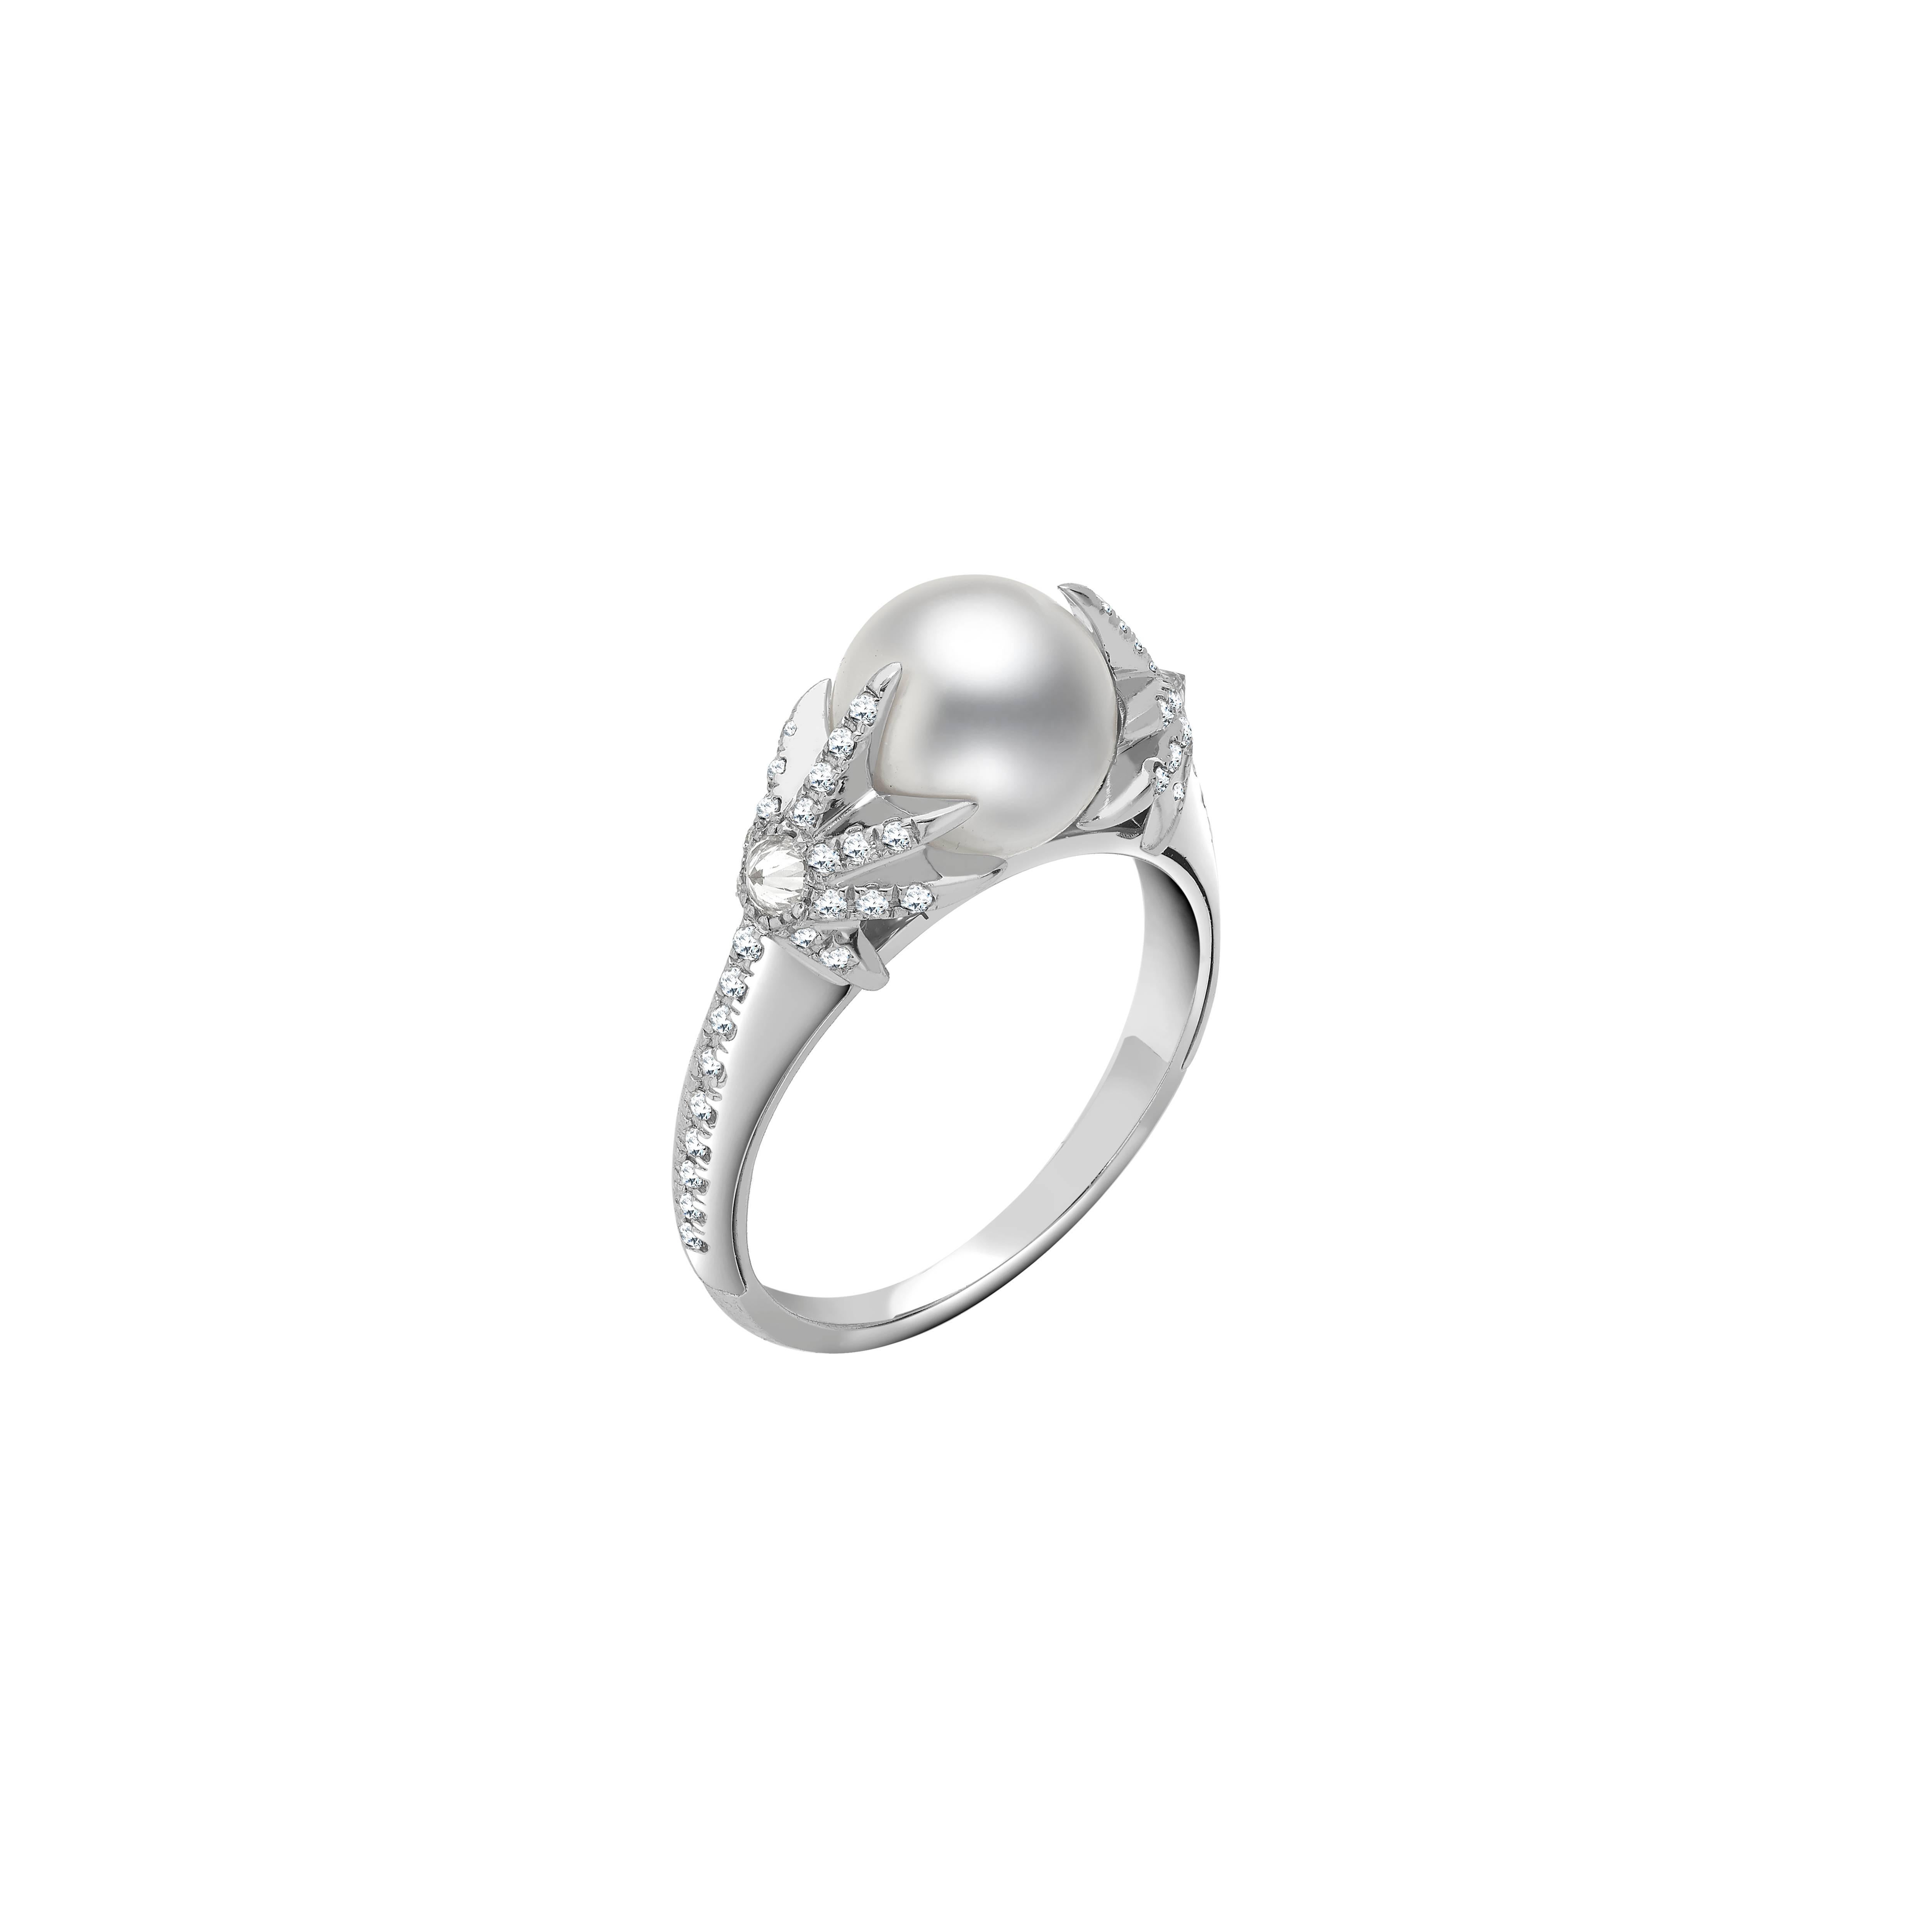 Ring size: 53
(Alternative sizes available on a made to order basis, with an estimated delivery time of 4-6 weeks)

18k White Gold 3.50gr, 60 Diamonds 0.28ct and a White Akoya Pearl

Oseanyx draws parallels between the beauty of outer space and that